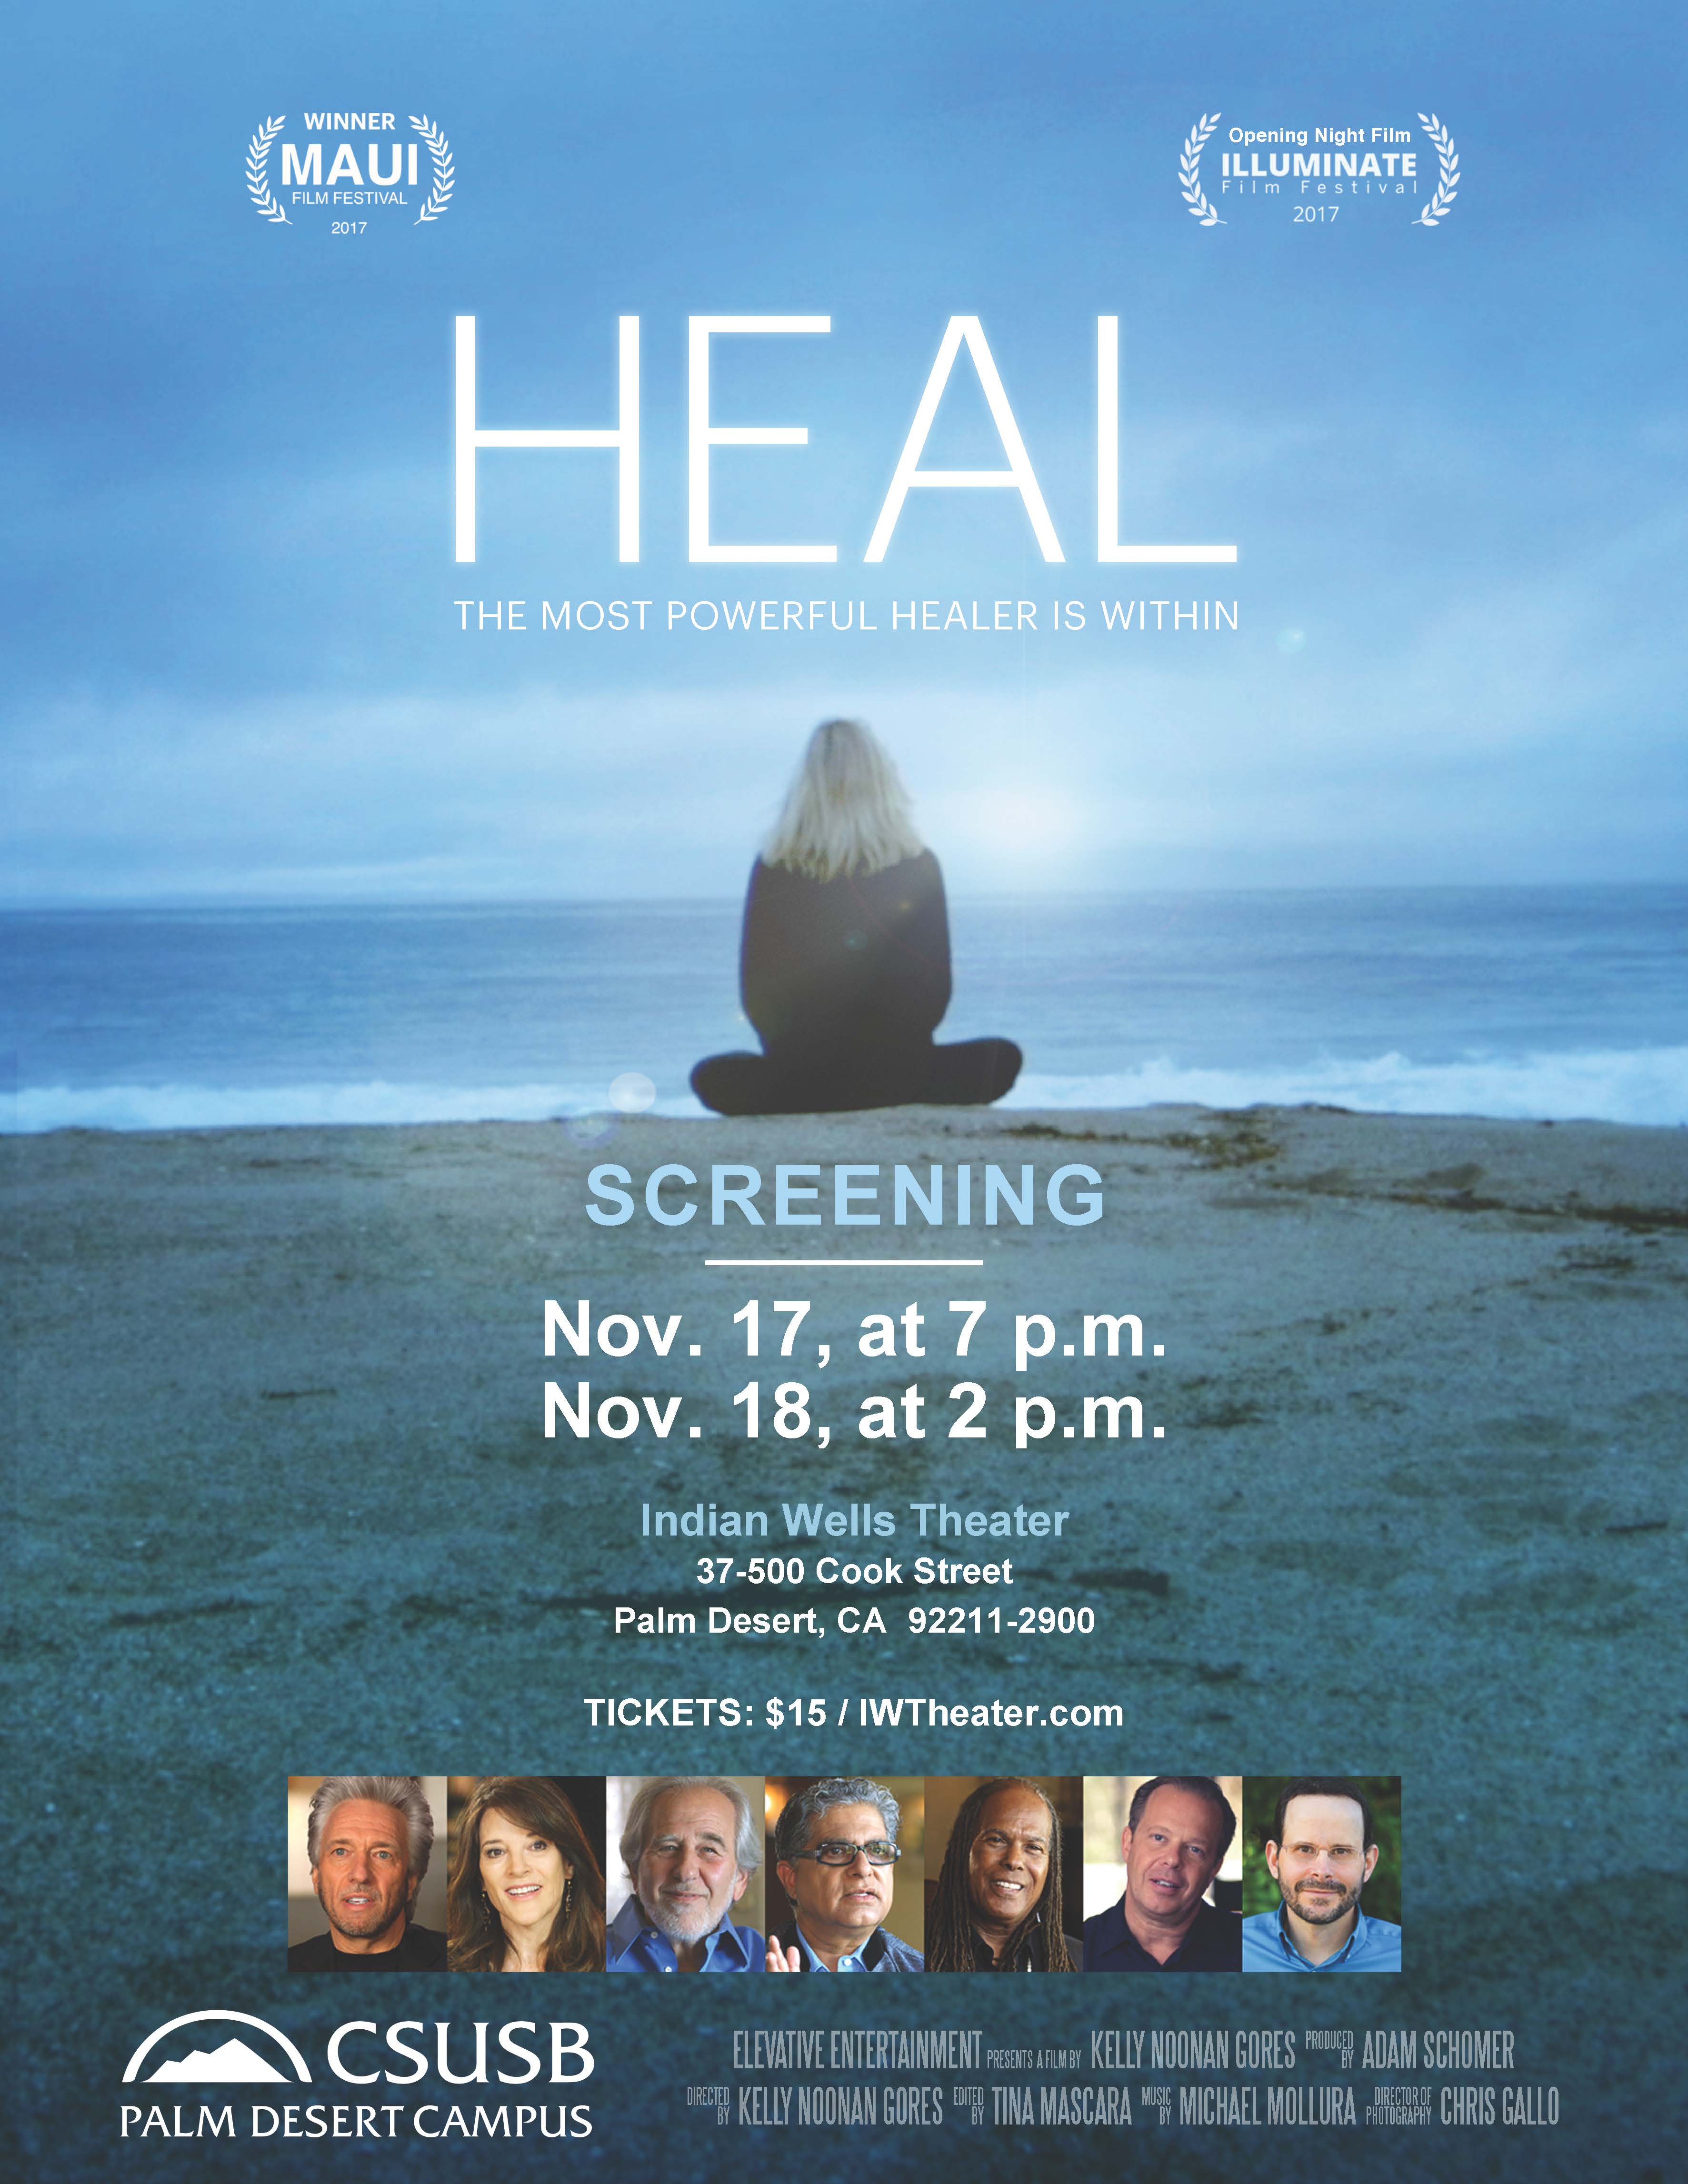 “HEAL” will be shown Friday, Nov. 17, at 7 p.m., and Saturday, Nov. 18, at 2 p.m., in the campus’s Indian Wells Theater. 